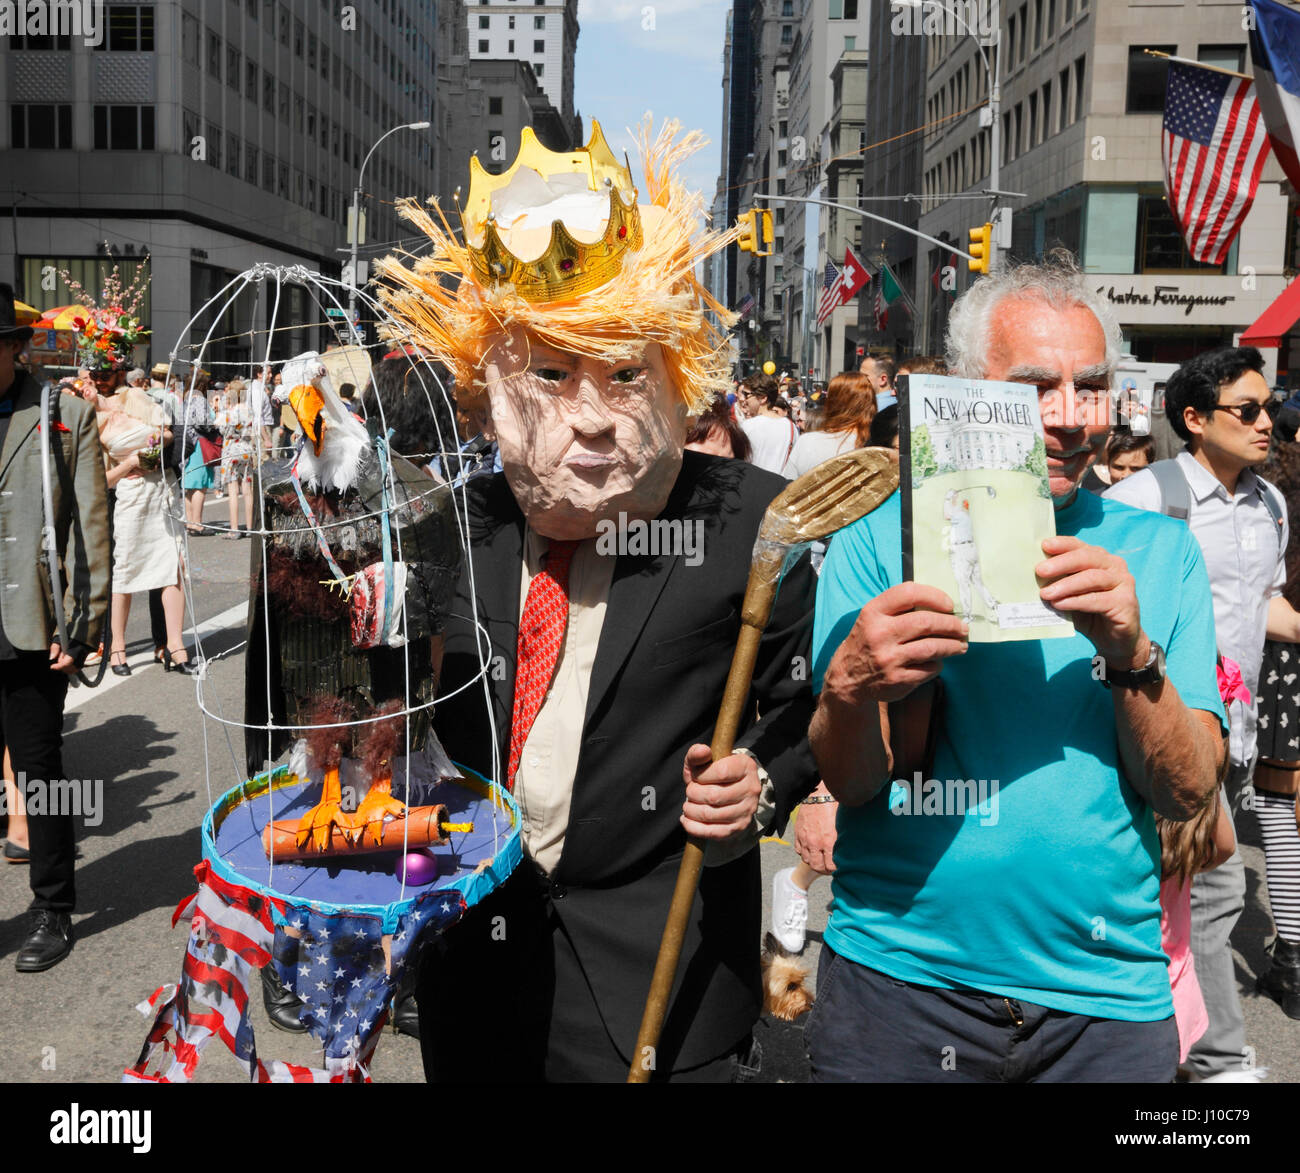 New York, USA. 16th Apr, 2017. Easter Parade and Bonnet Festival in Manhattan, Man wearing U.S. President Donald Trump's mask and costume, Fifth avenue in New York City, April 16, 2017. Credit: Nino Marcutti/Alamy Live News Stock Photo